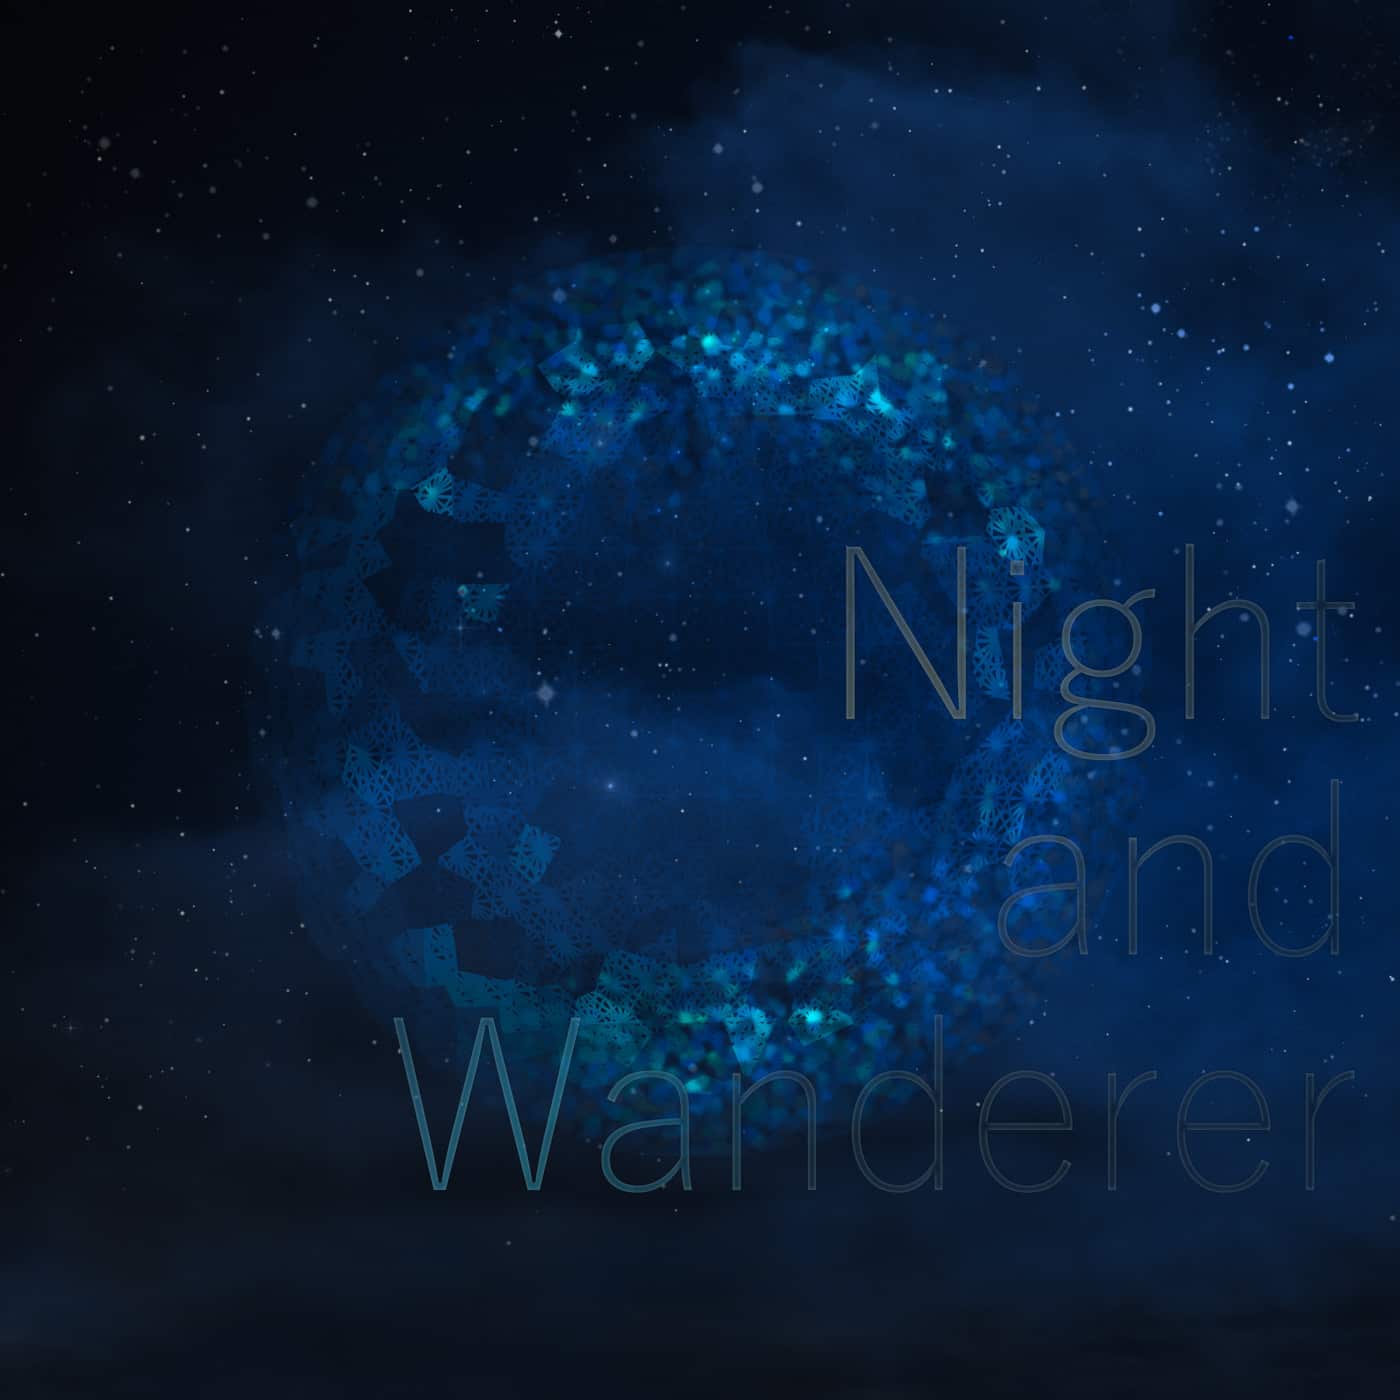 theme02 Night and Wanderer